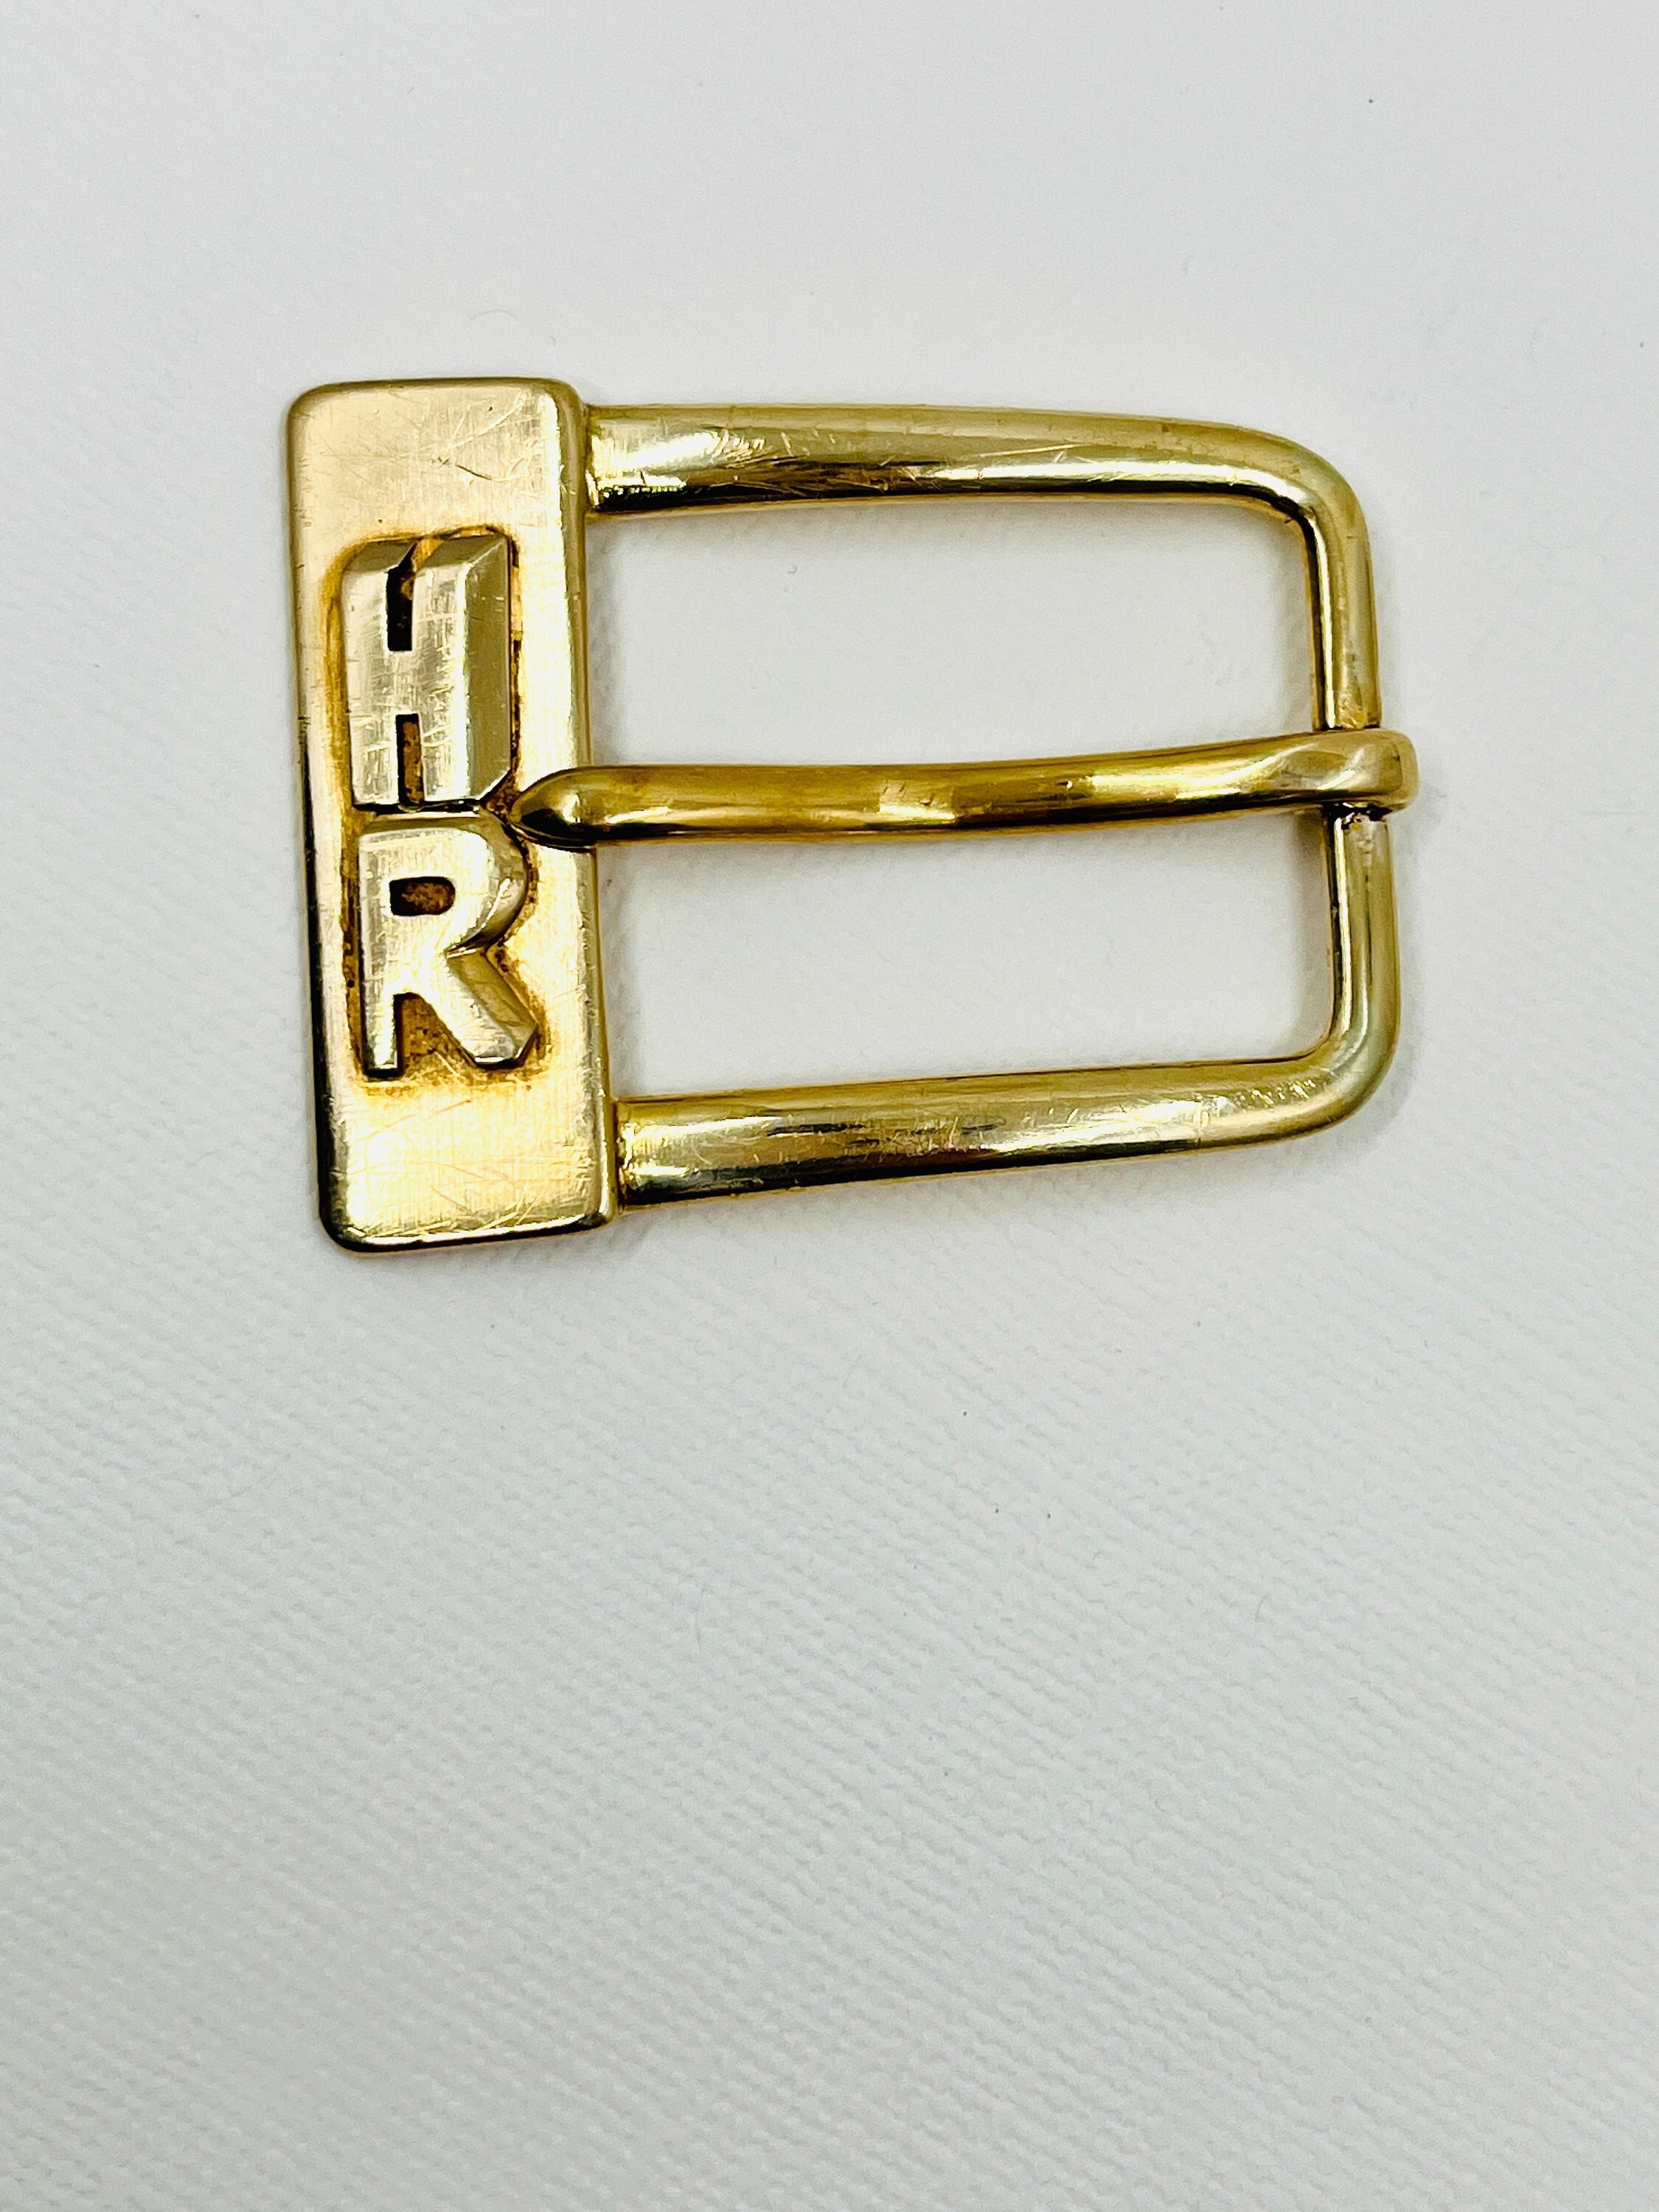 Comstock Heritage New Orleans Engraved Buckle | 14K Gold Monogram Belt Buckle 1.5 / All 14K Yellow Gold